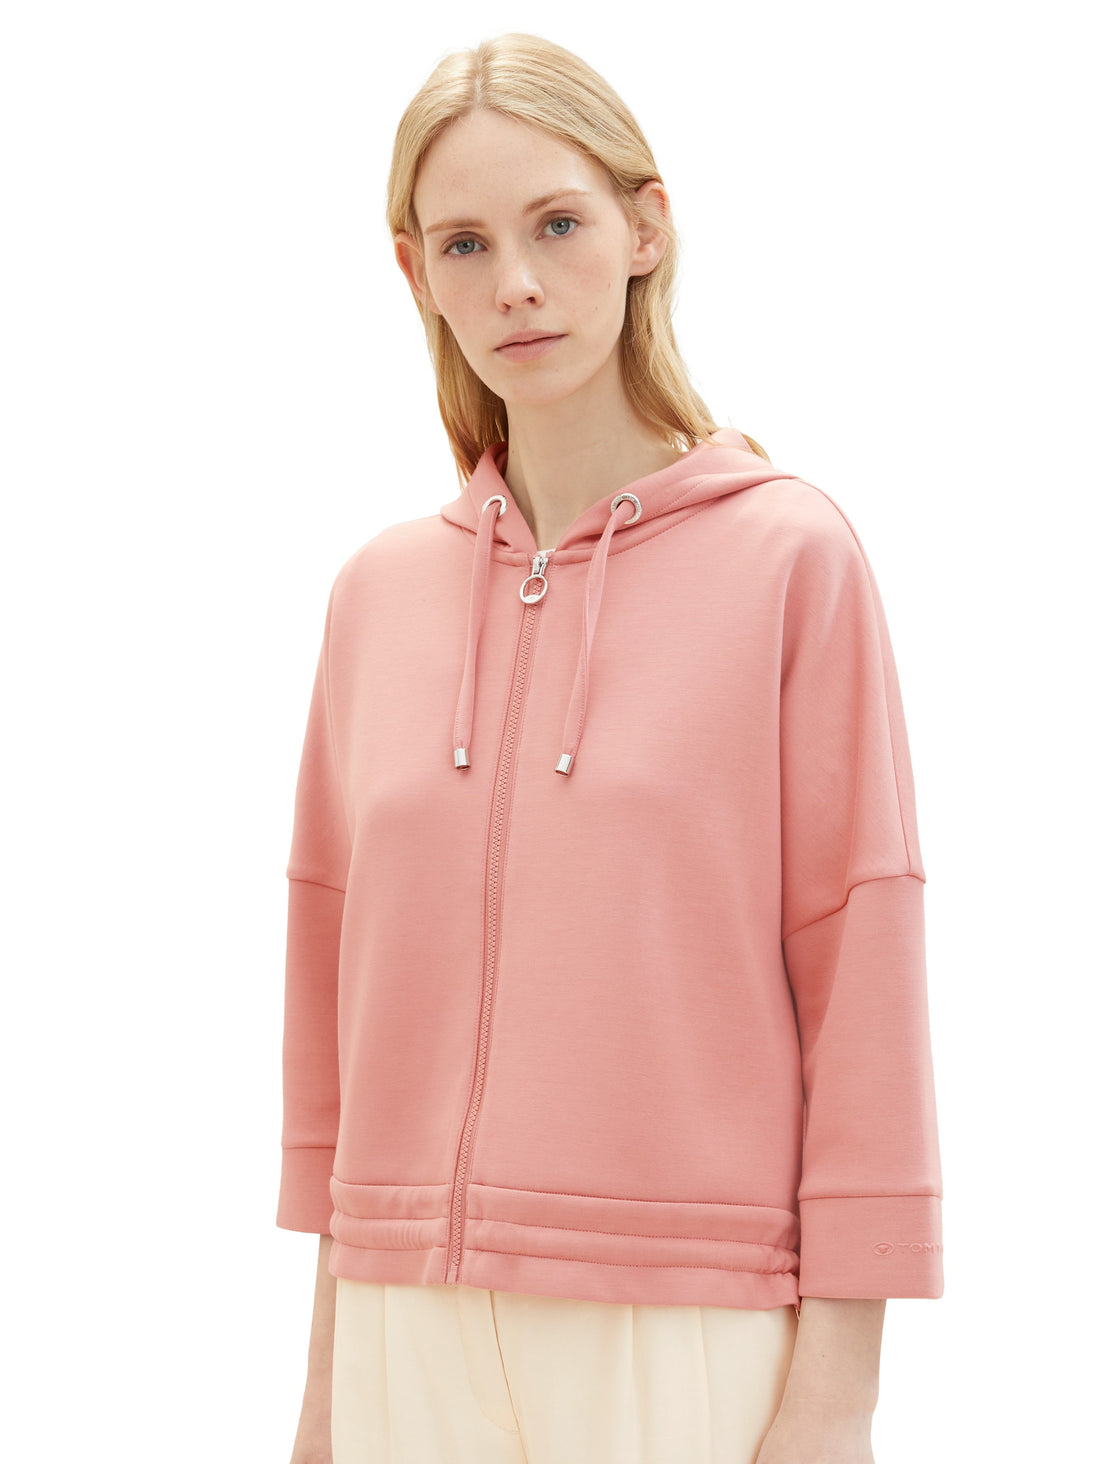 Hoodie With Adjustable Side Strap_1038182_32224_06